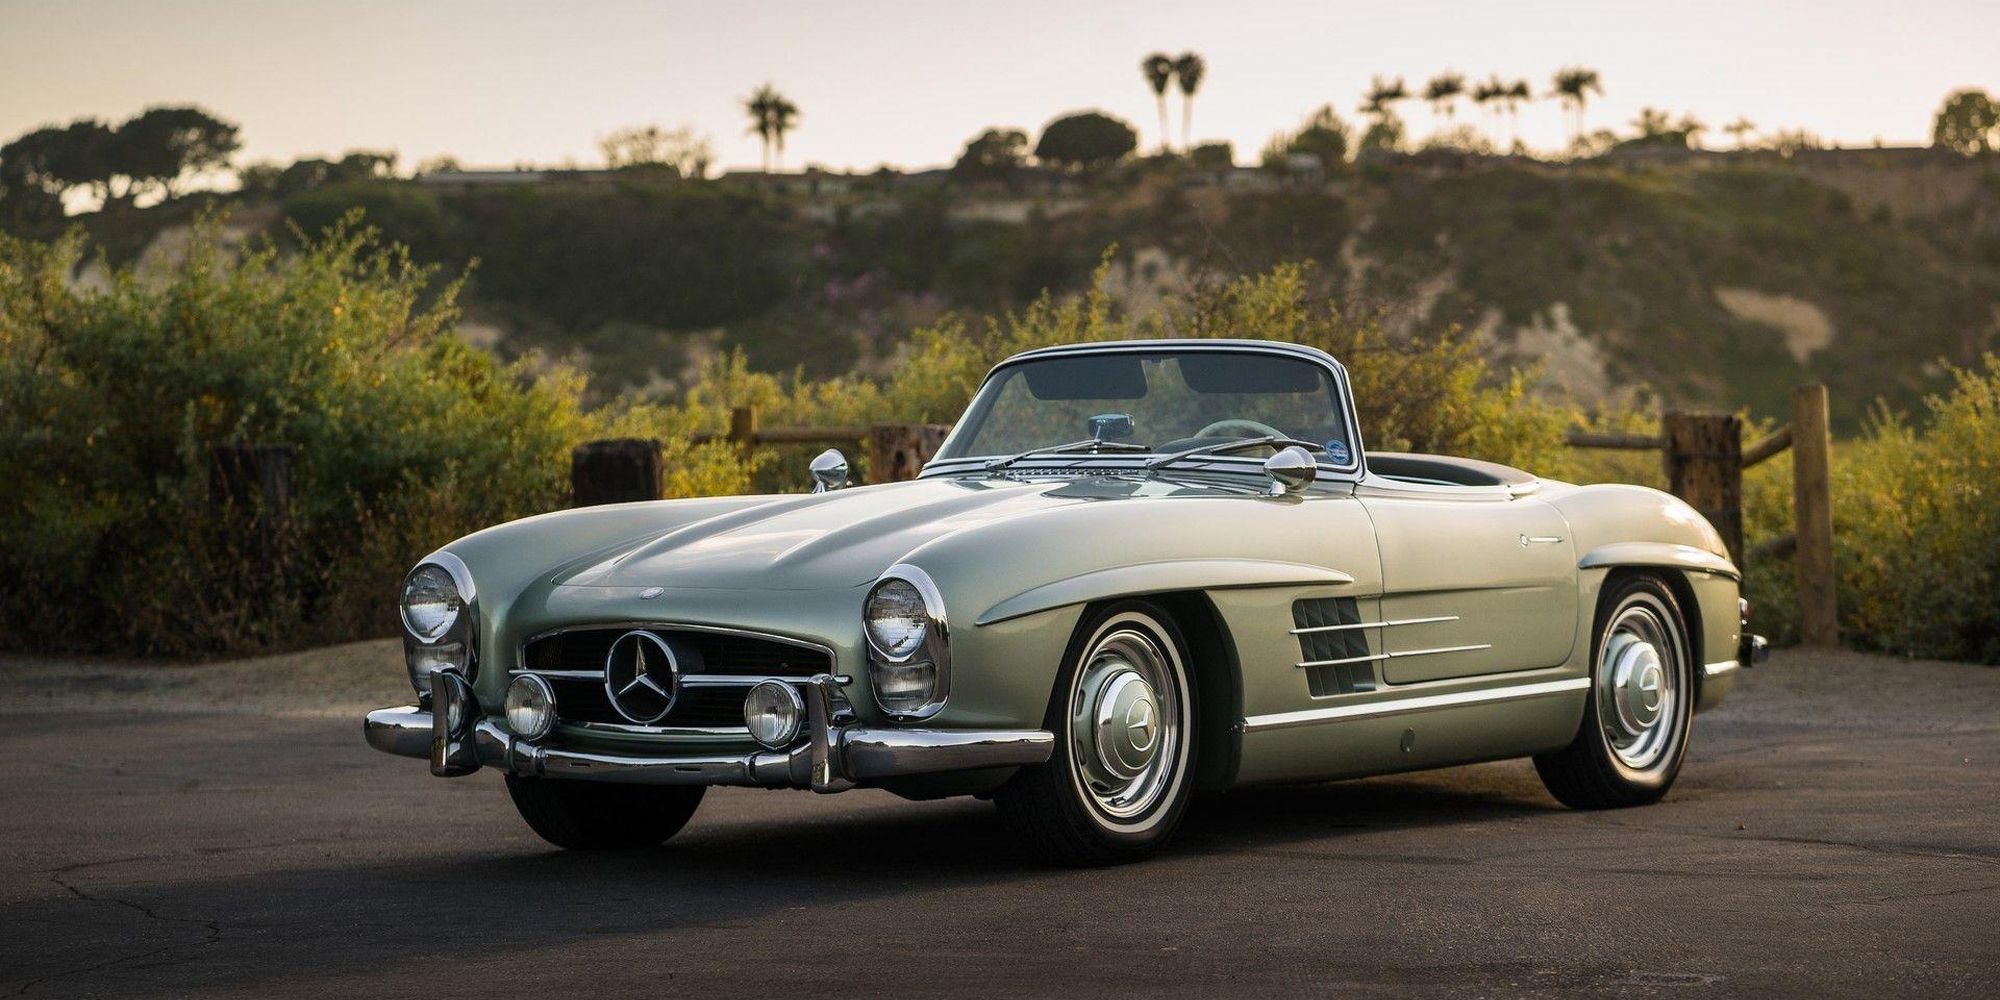 The front of the 300SL Roadster